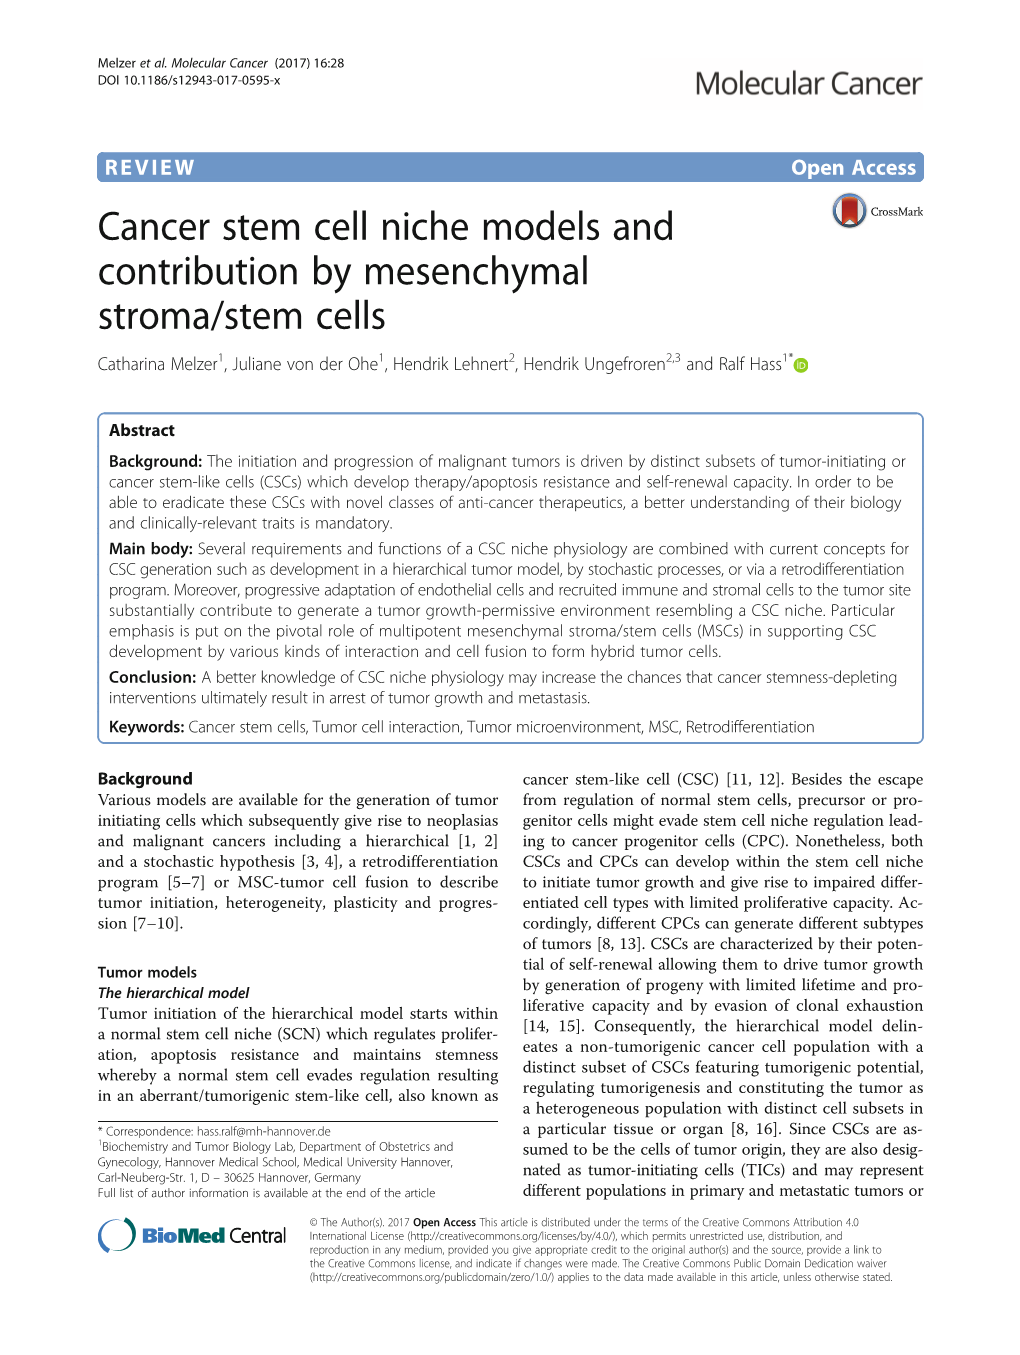 Cancer Stem Cell Niche Models and Contribution by Mesenchymal